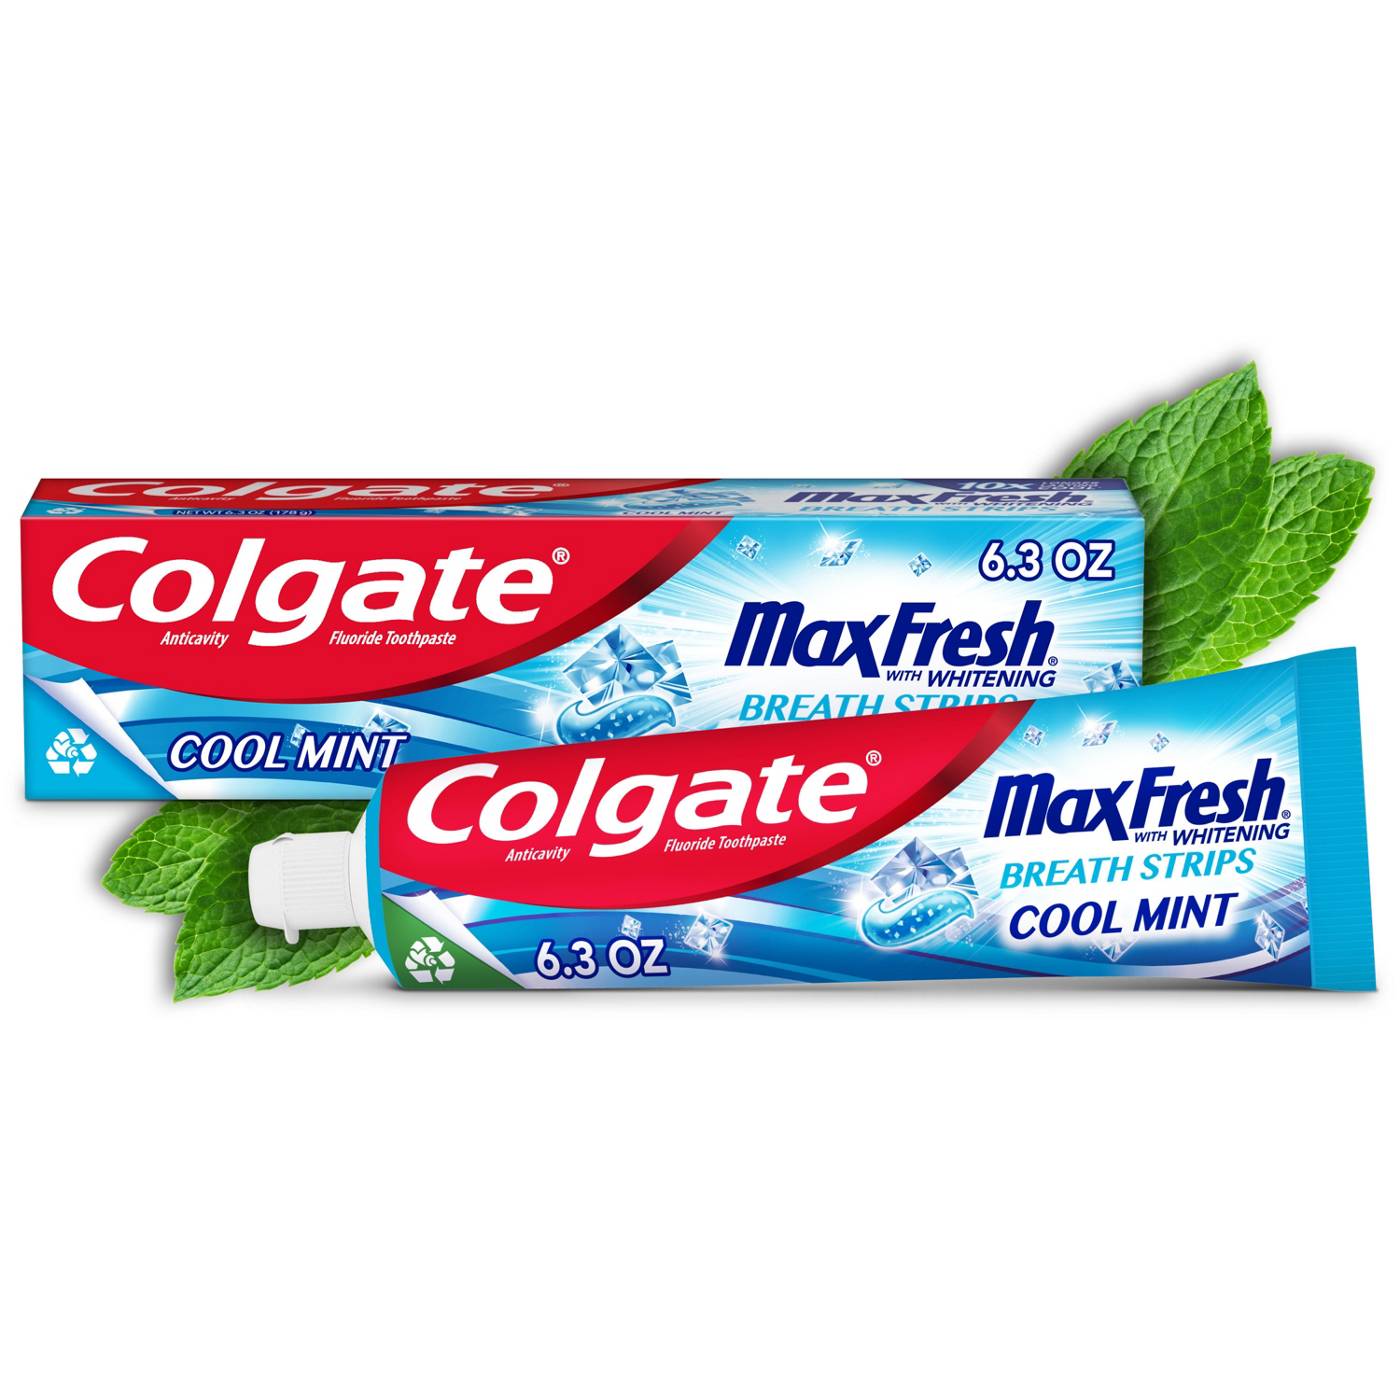 Colgate Max Fresh Anticavity Toothpaste - Cool Mint; image 14 of 15